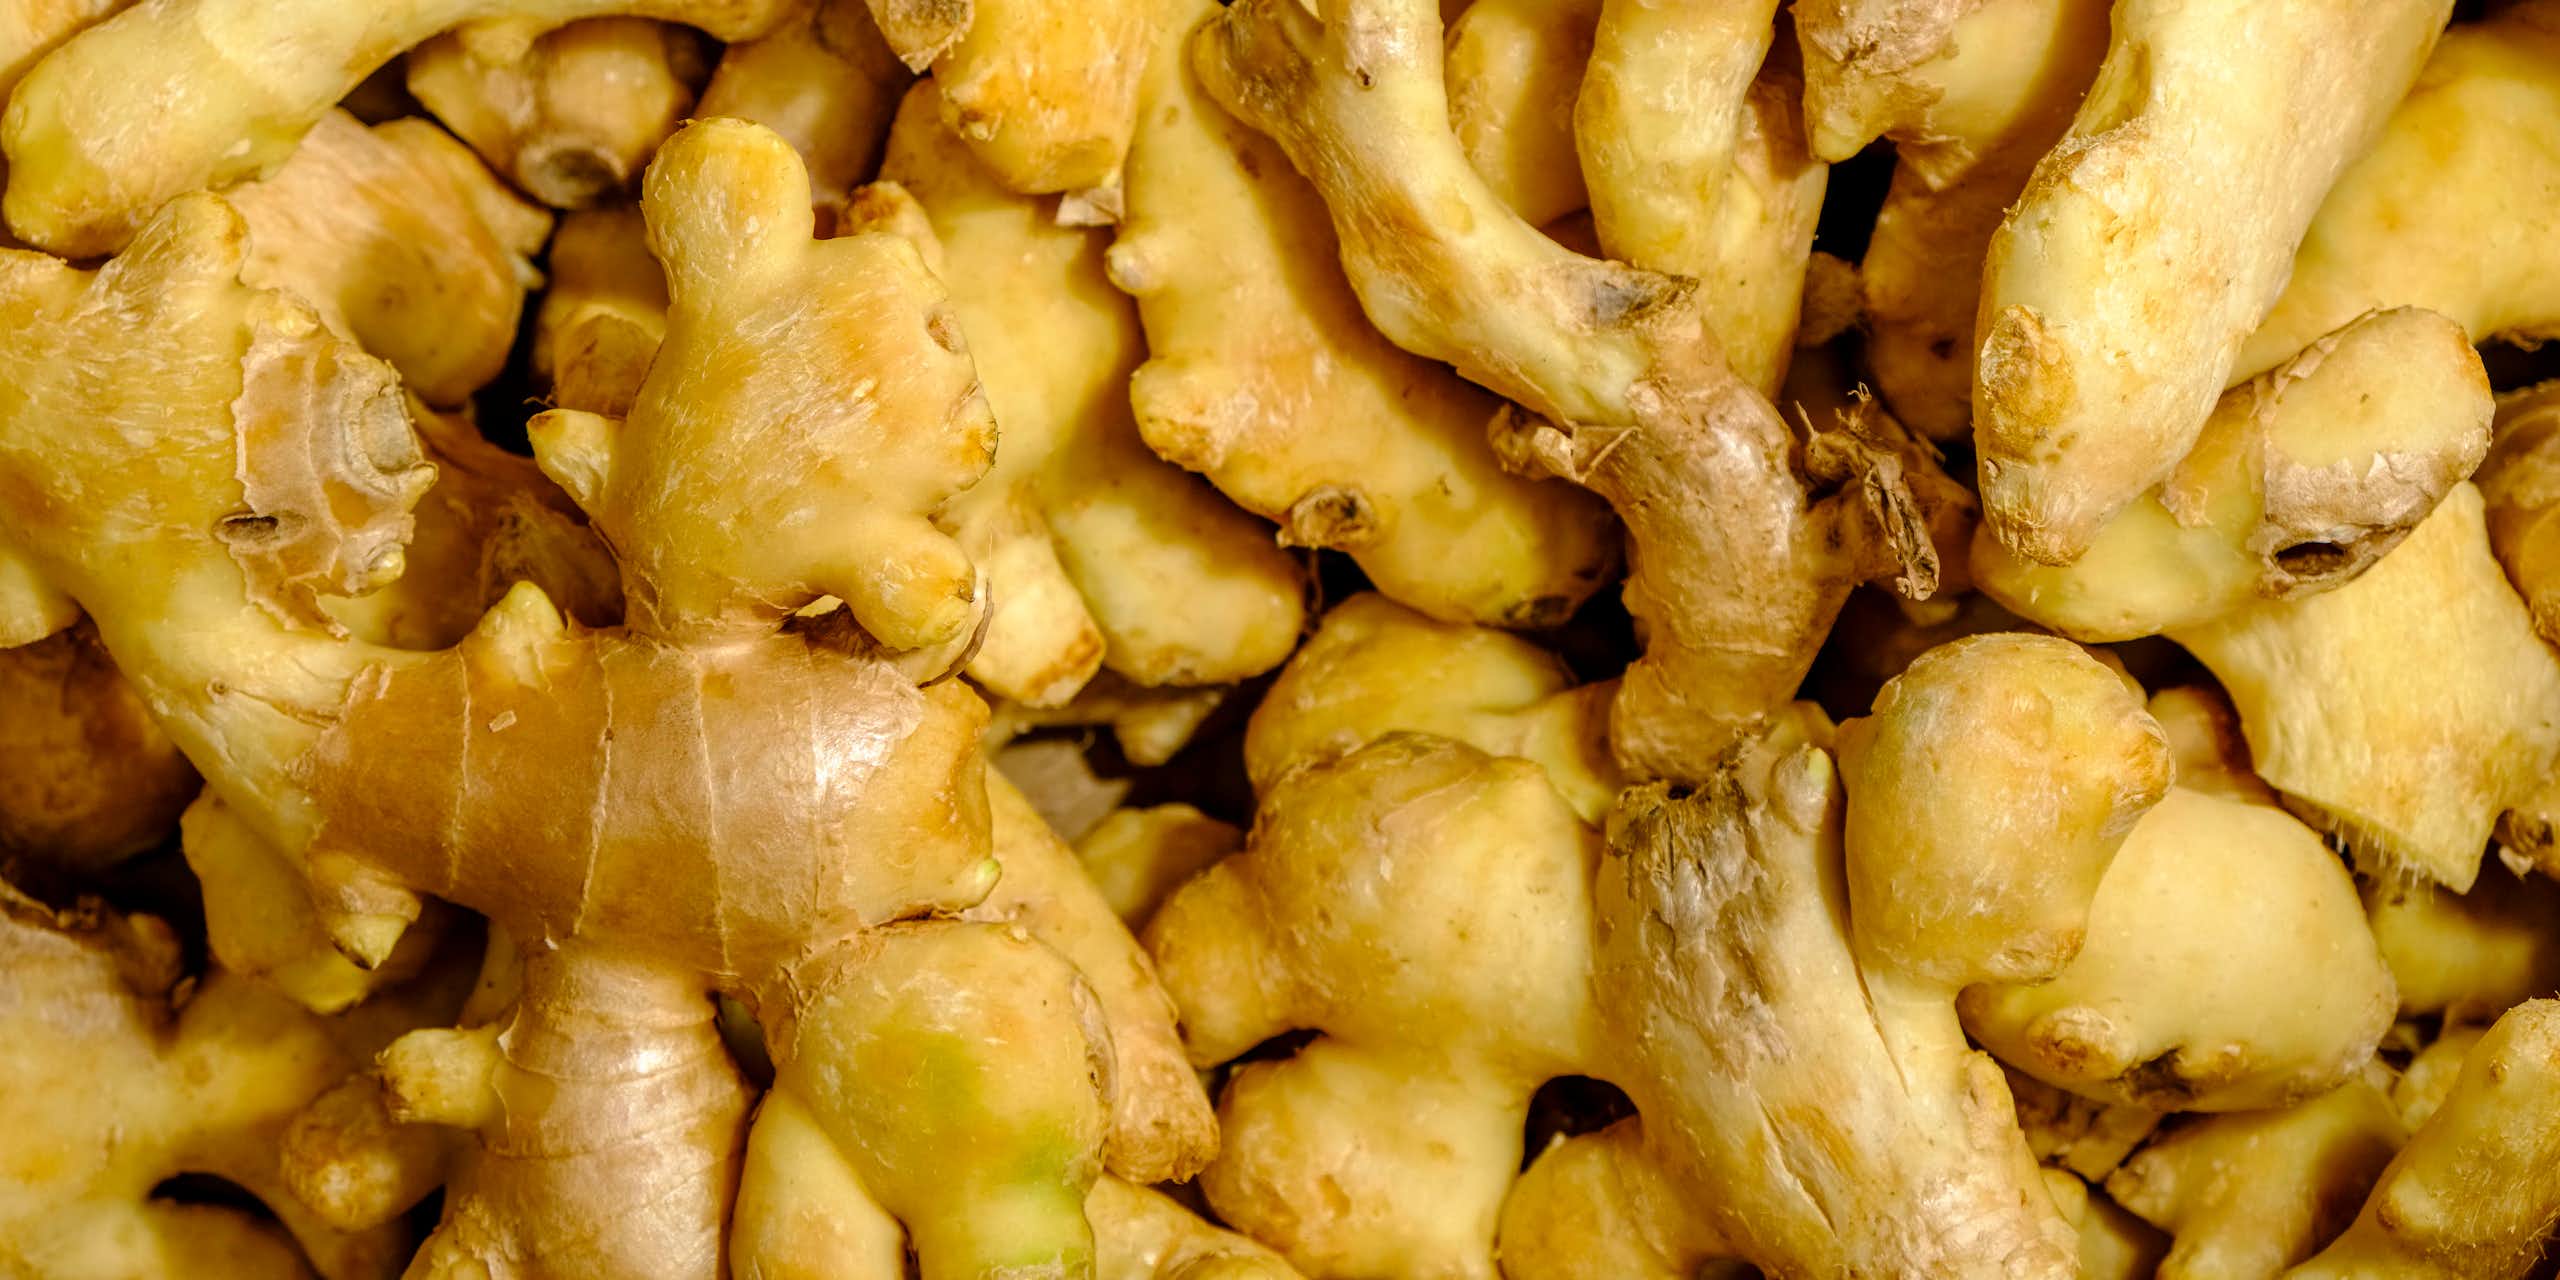 Ginger roots on display